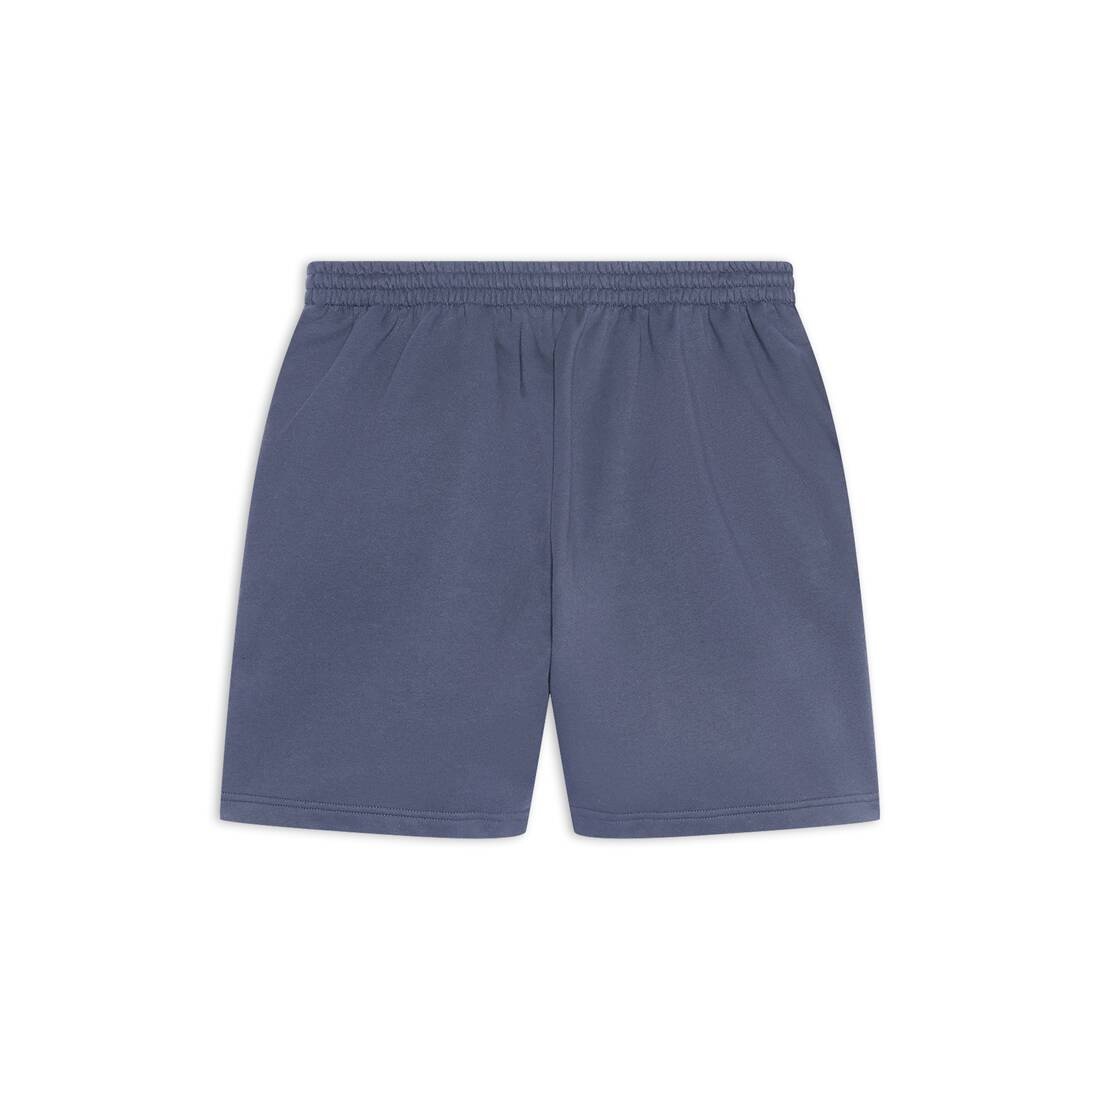 Men's Political Campaign Sweat Shorts in Grey - 5